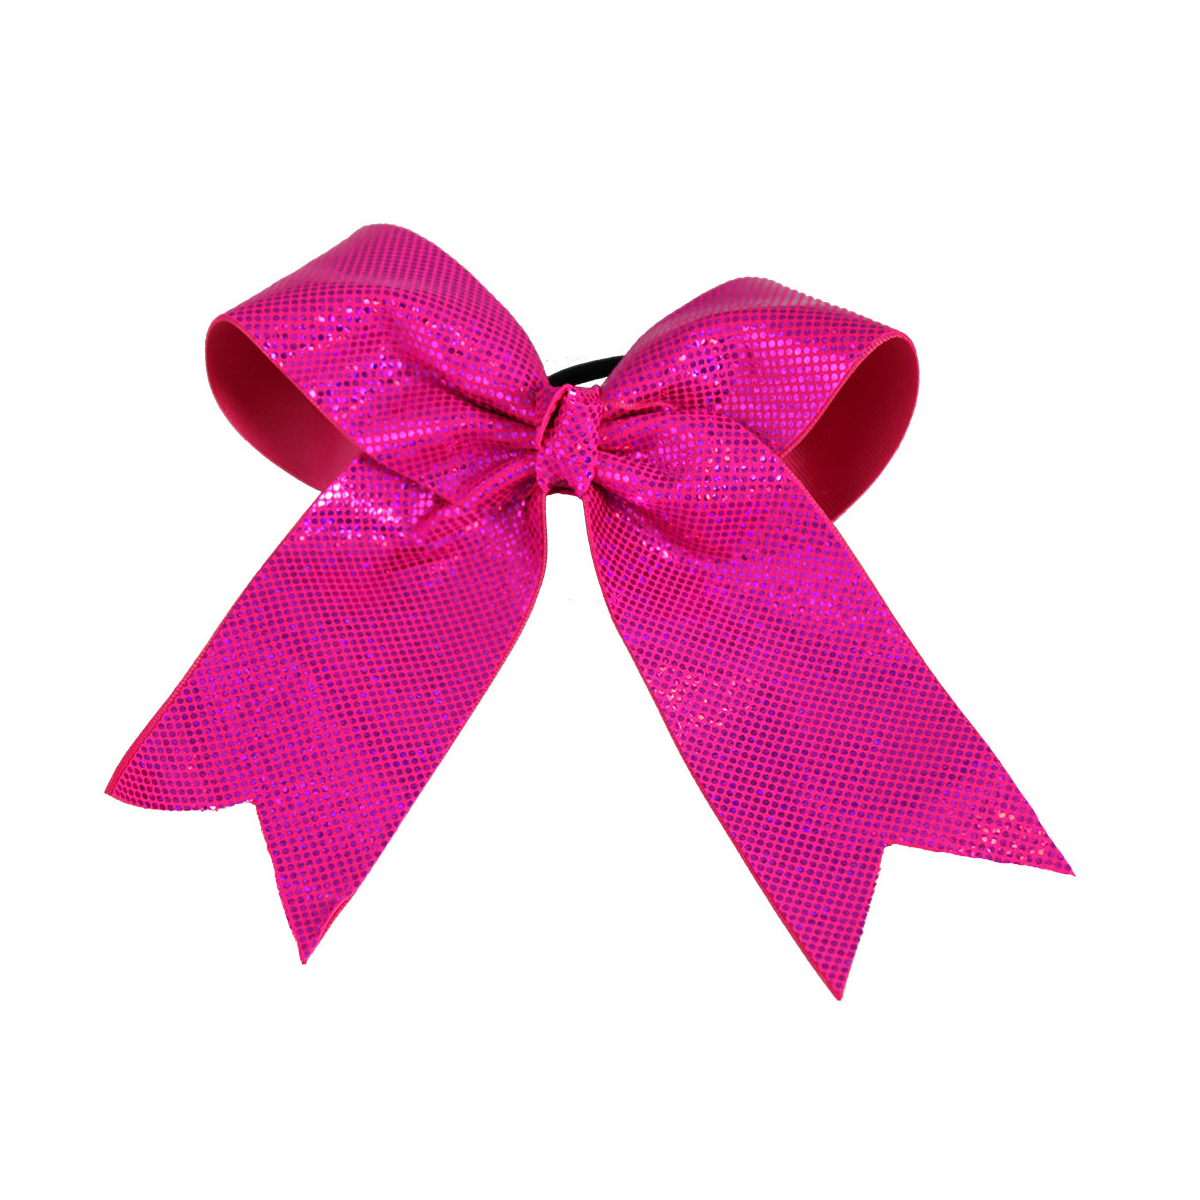 In Stock Large HoloFlex Metallic Short Tail Bow-HoloFlex Hot Pink